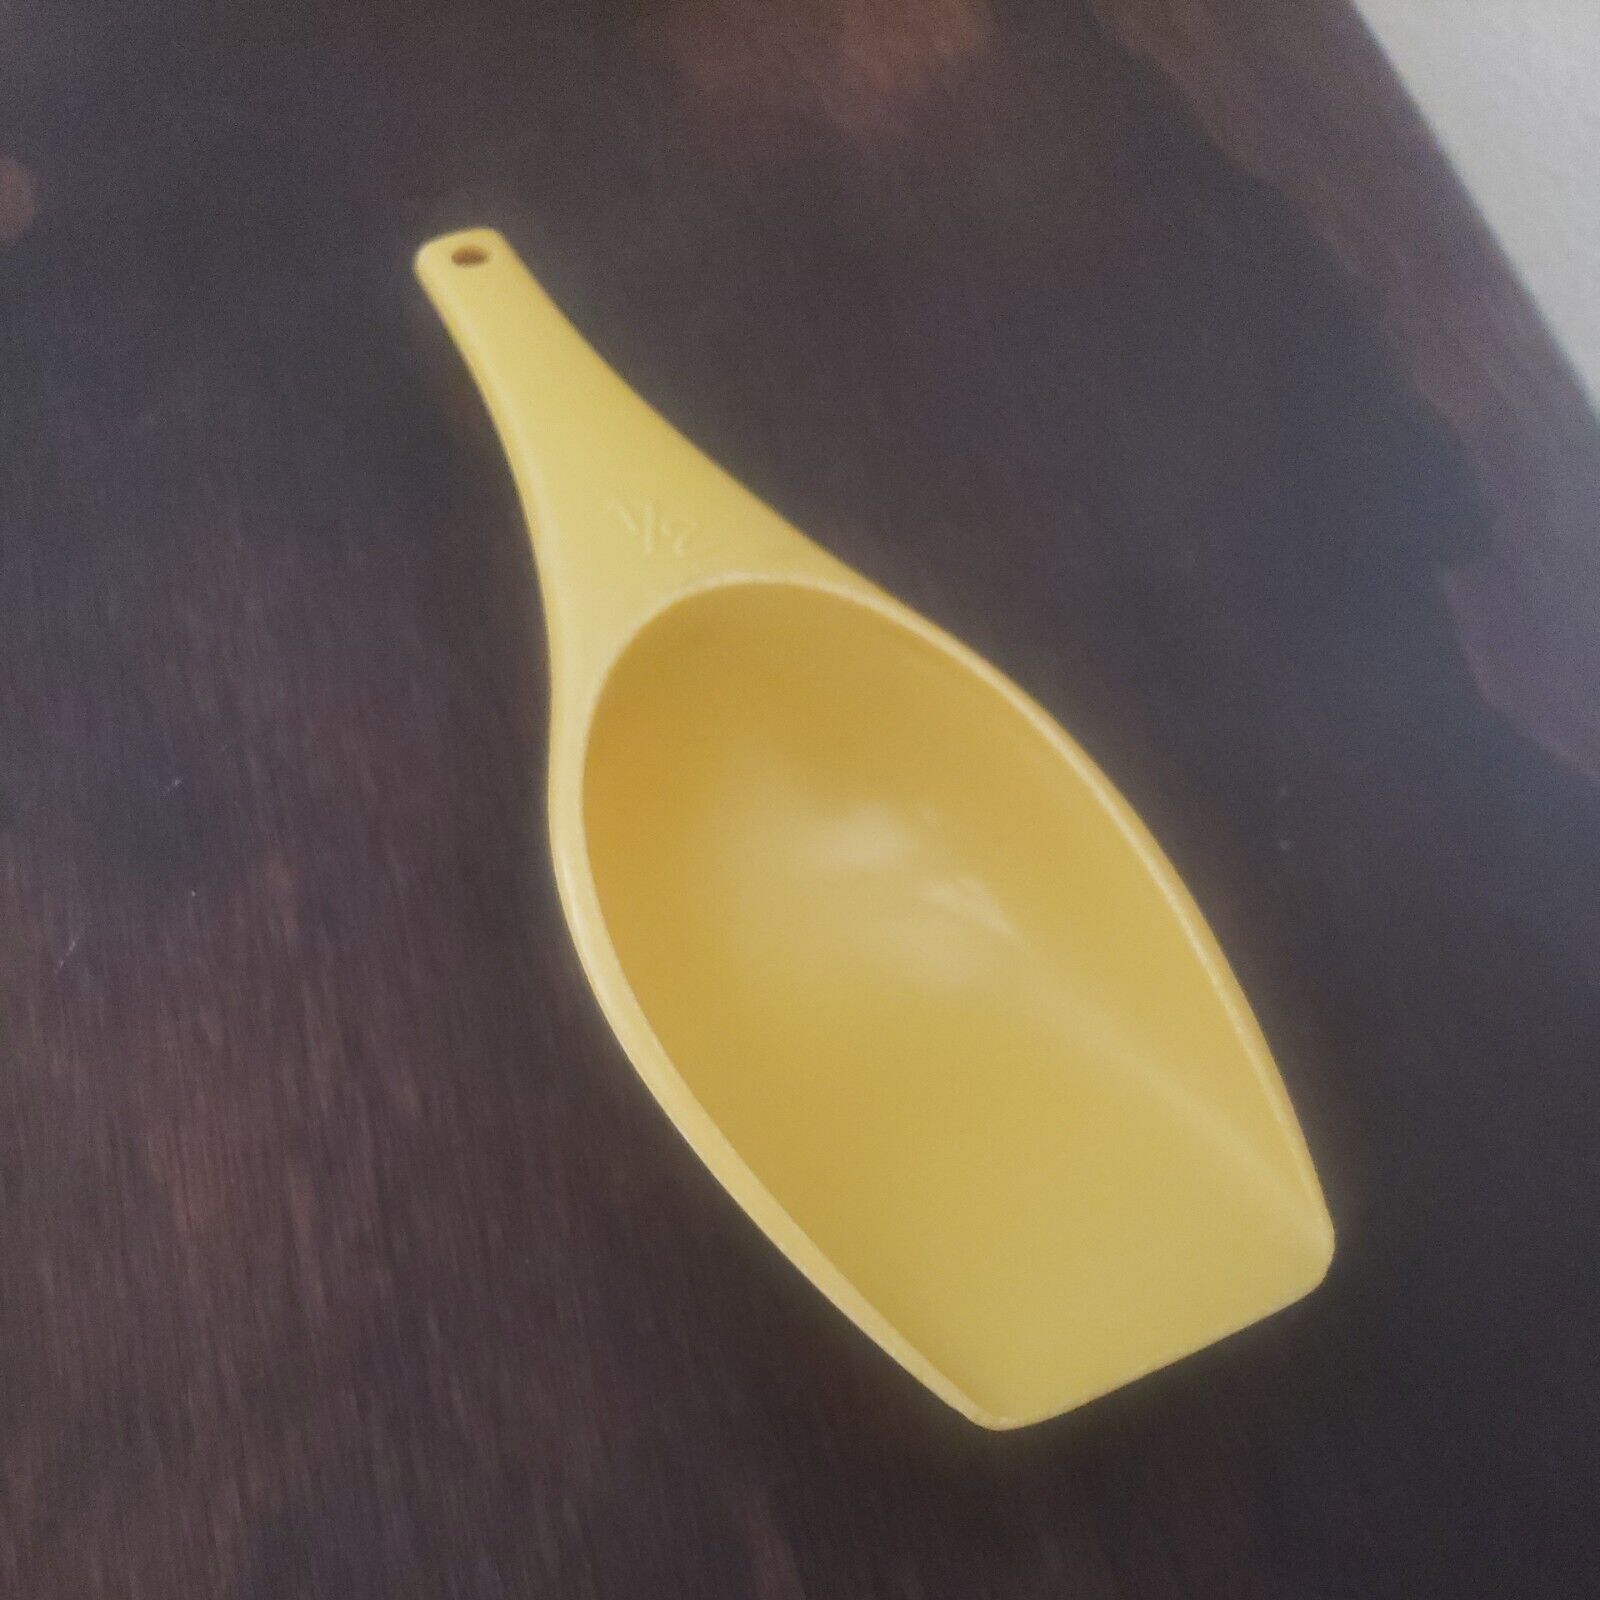 VINTAGE FOLEY HARVEST GOLD YELLOW MEASURING SPOON SCOOPS 1/2